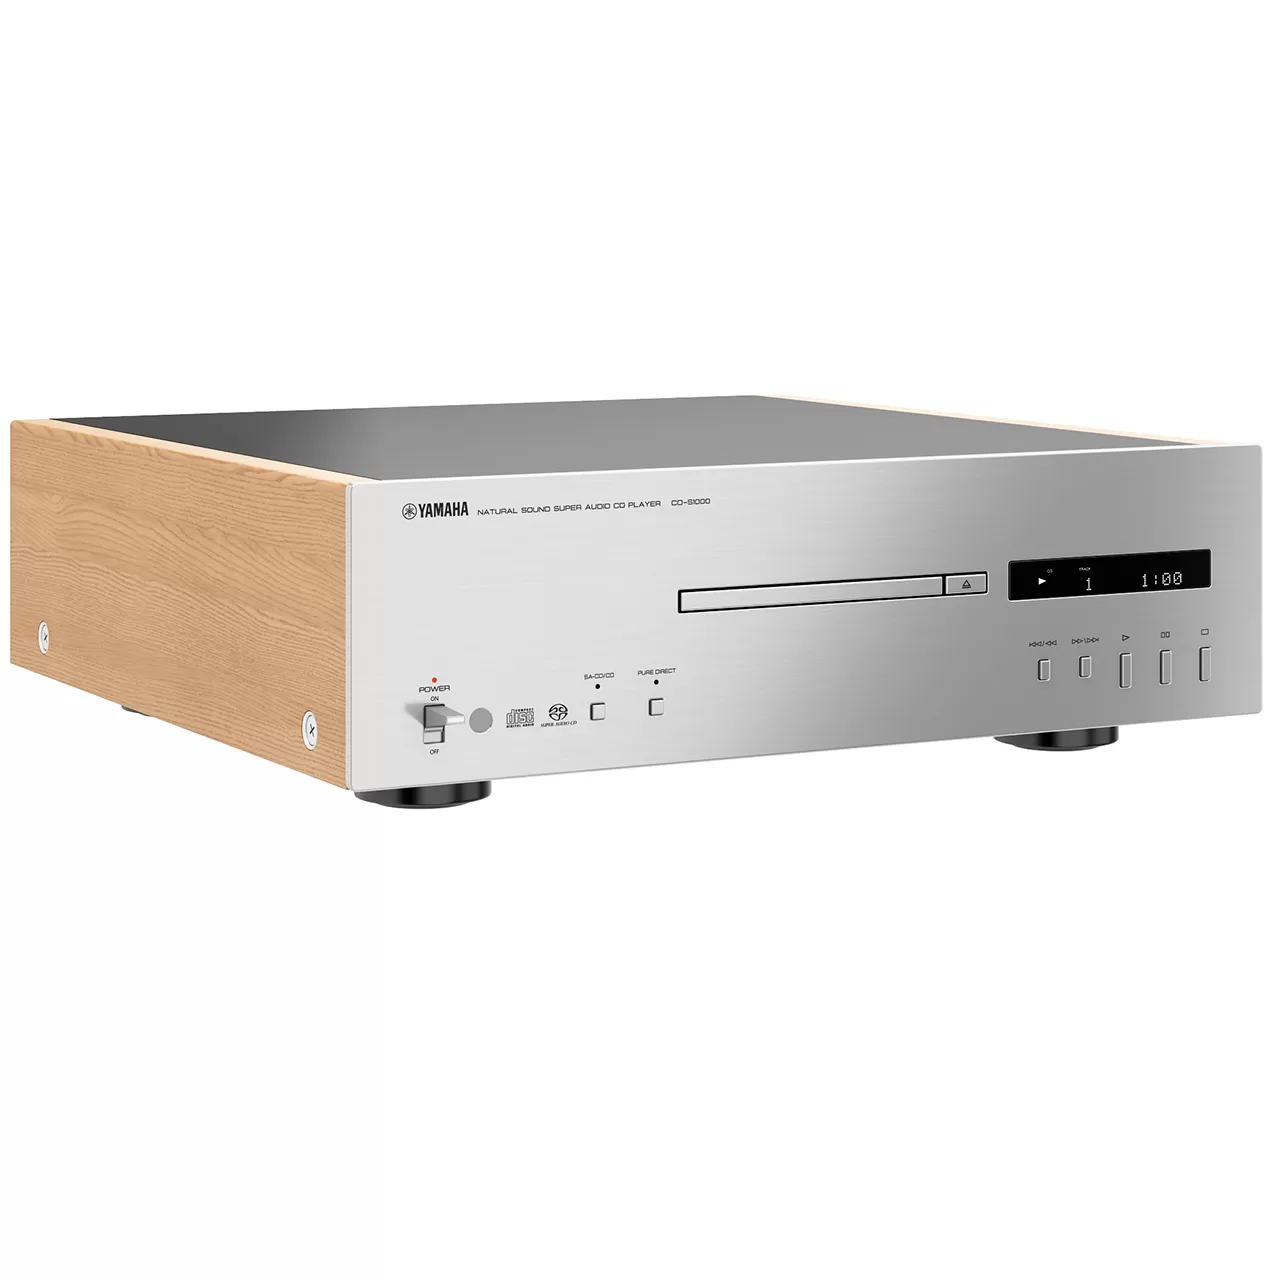 Products – sound-super-audio-cd-player-cd-s1000-by-yamaha